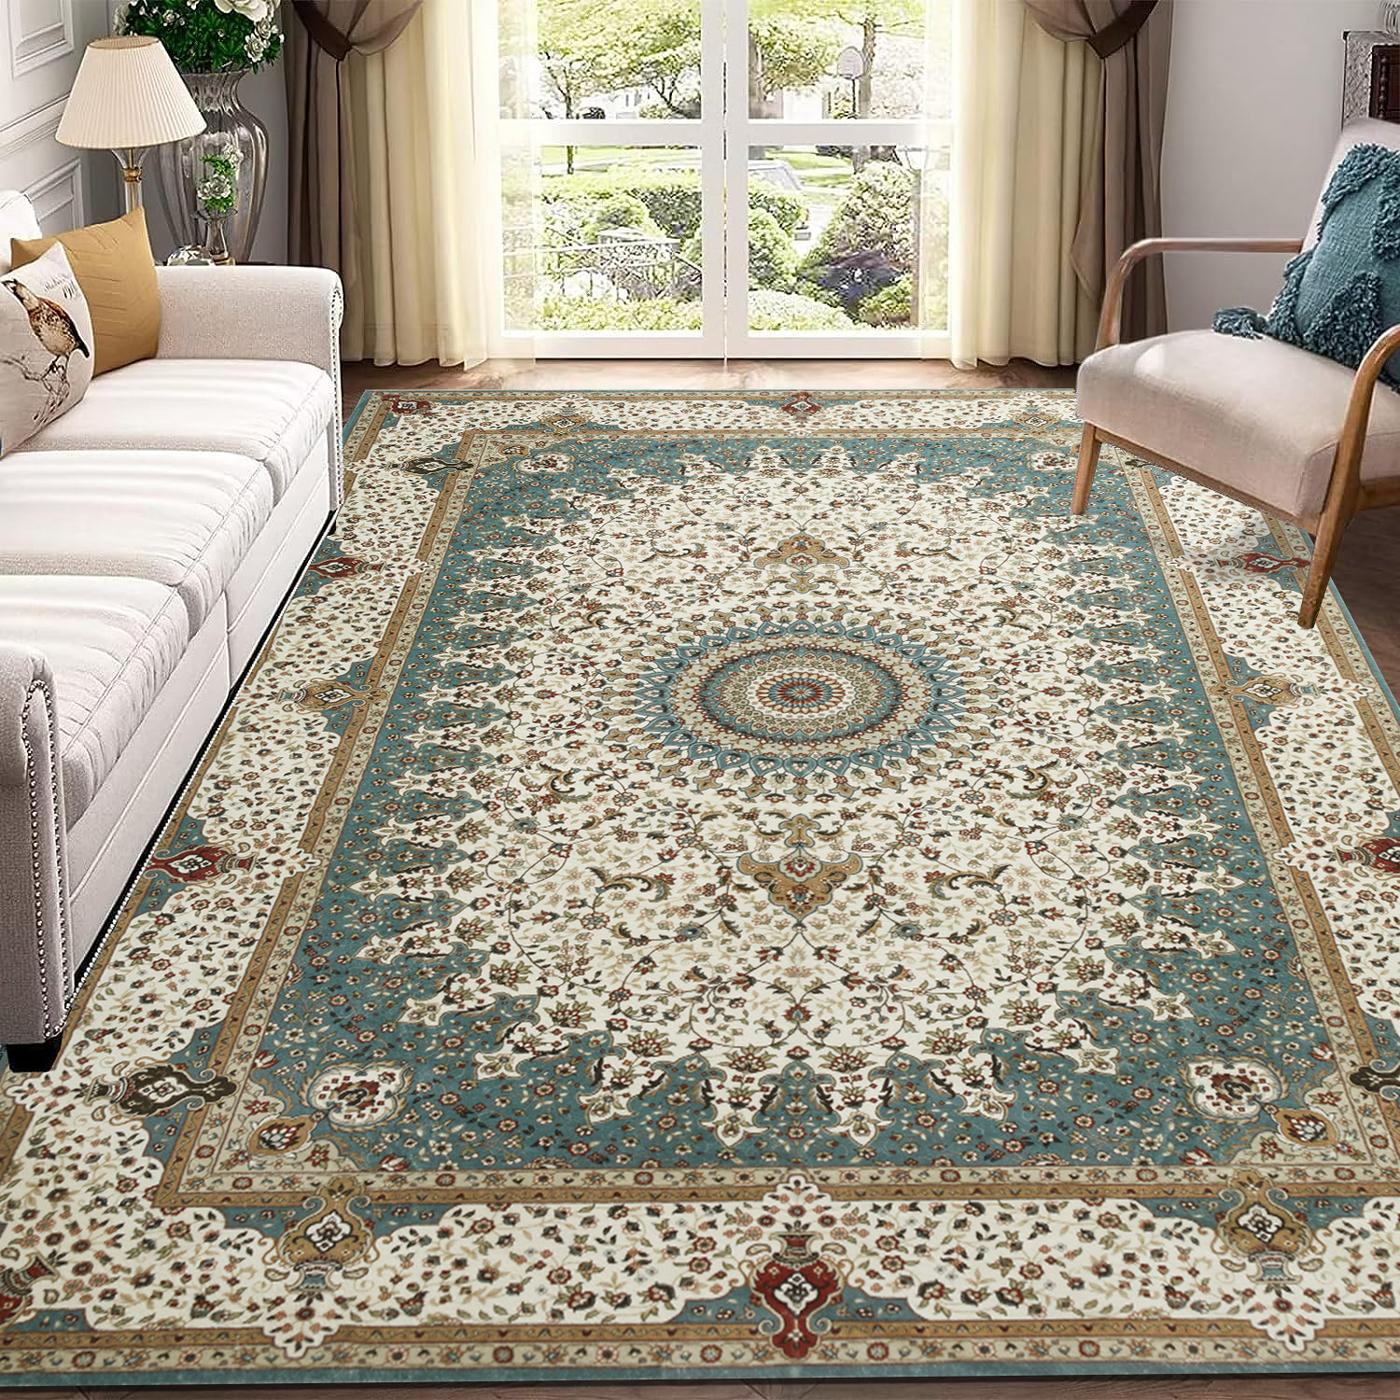 Large Area Bedroom Rectangle Willow Rug